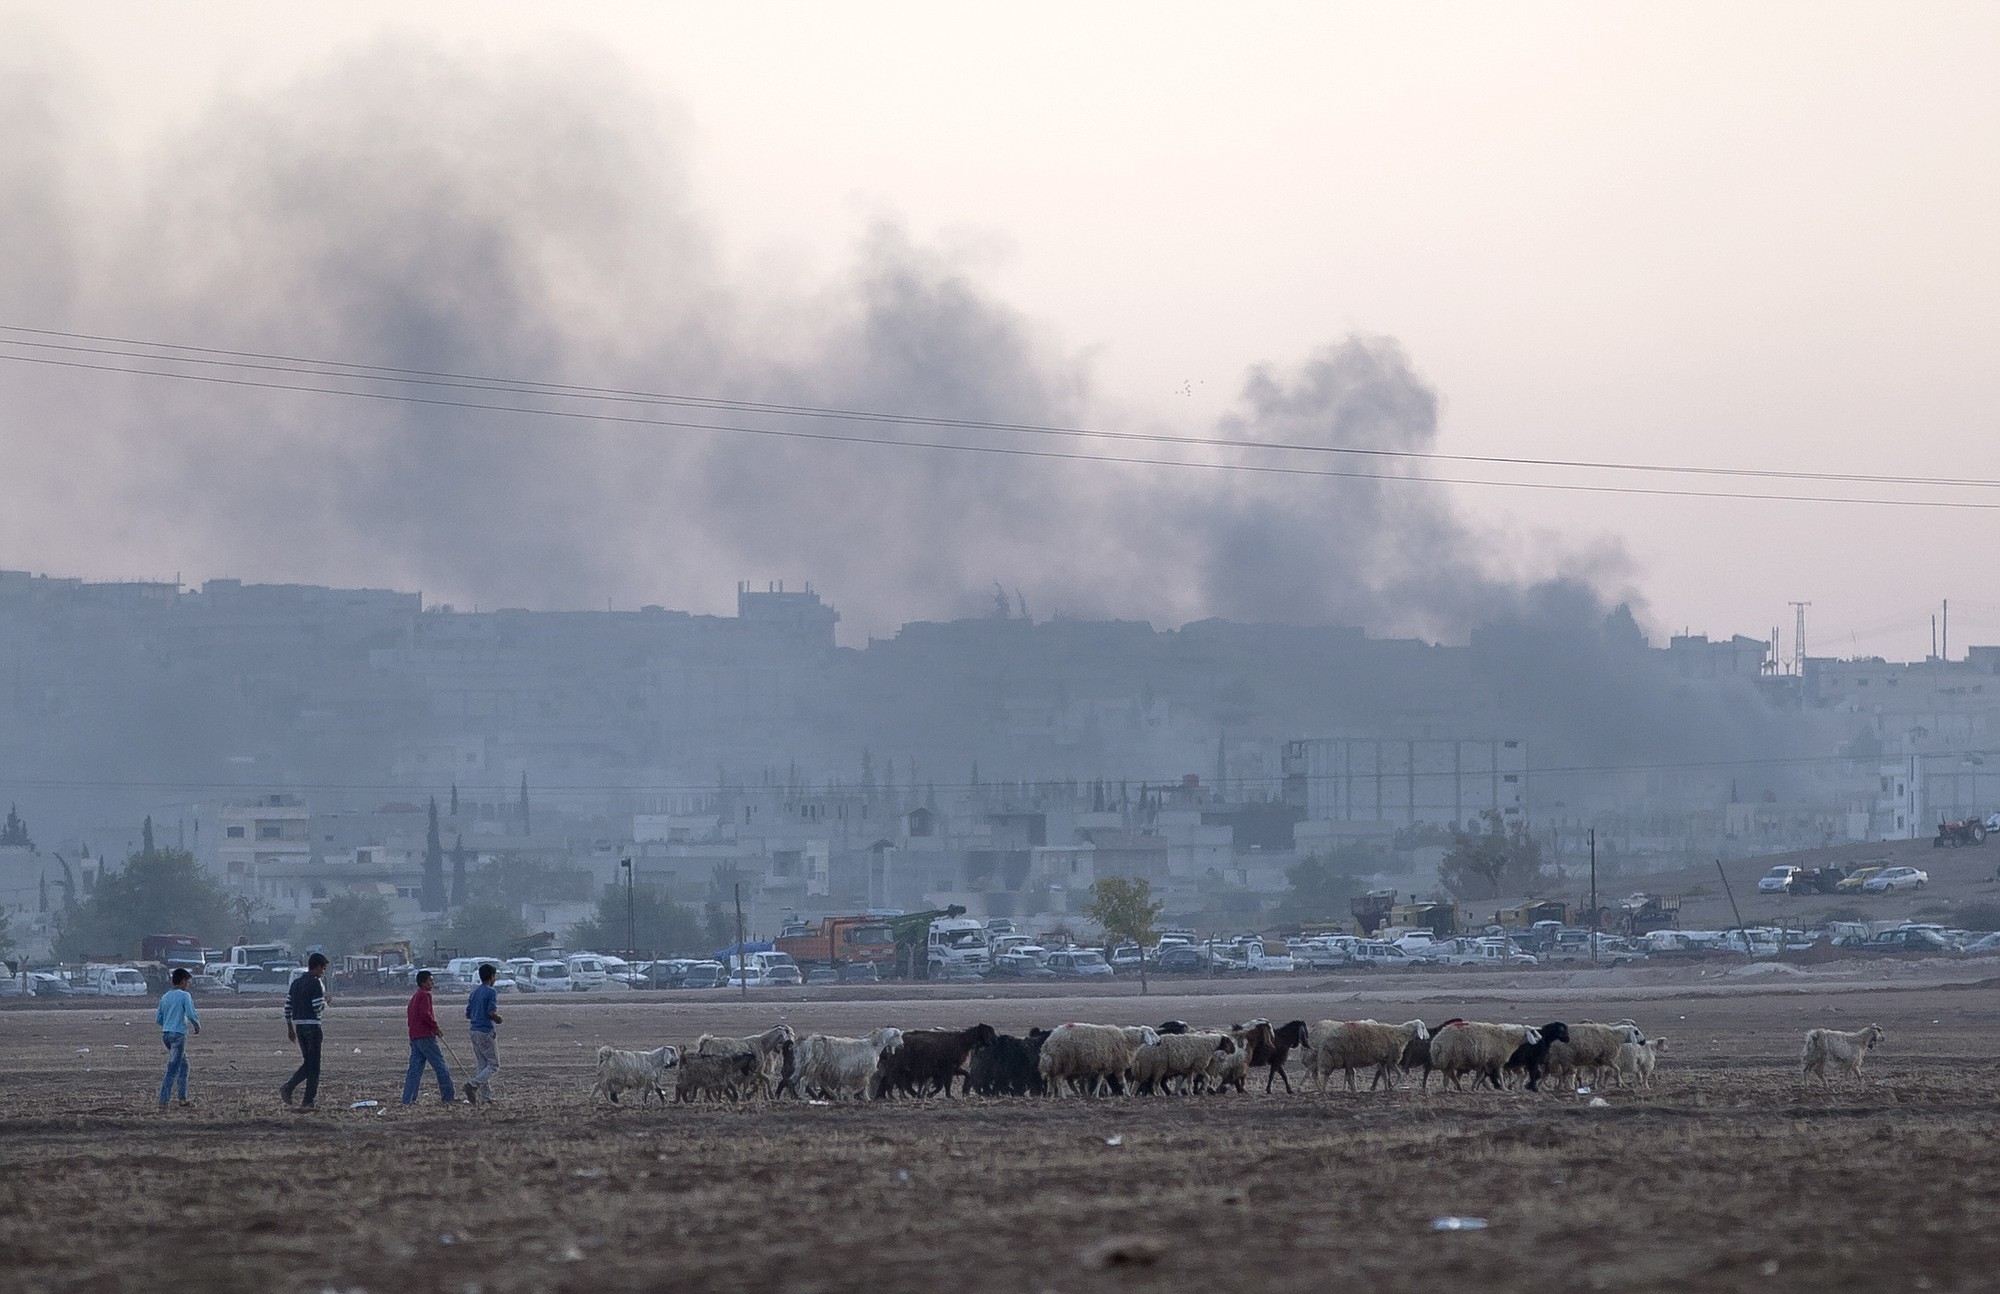 People herd a flock of sheep backdropped by the Syrian city of Kobani engulfed in smoke, following airstrikes by the US led coalition on the outskirts of Suruc, near the Turkey-Syria border, Saturday.